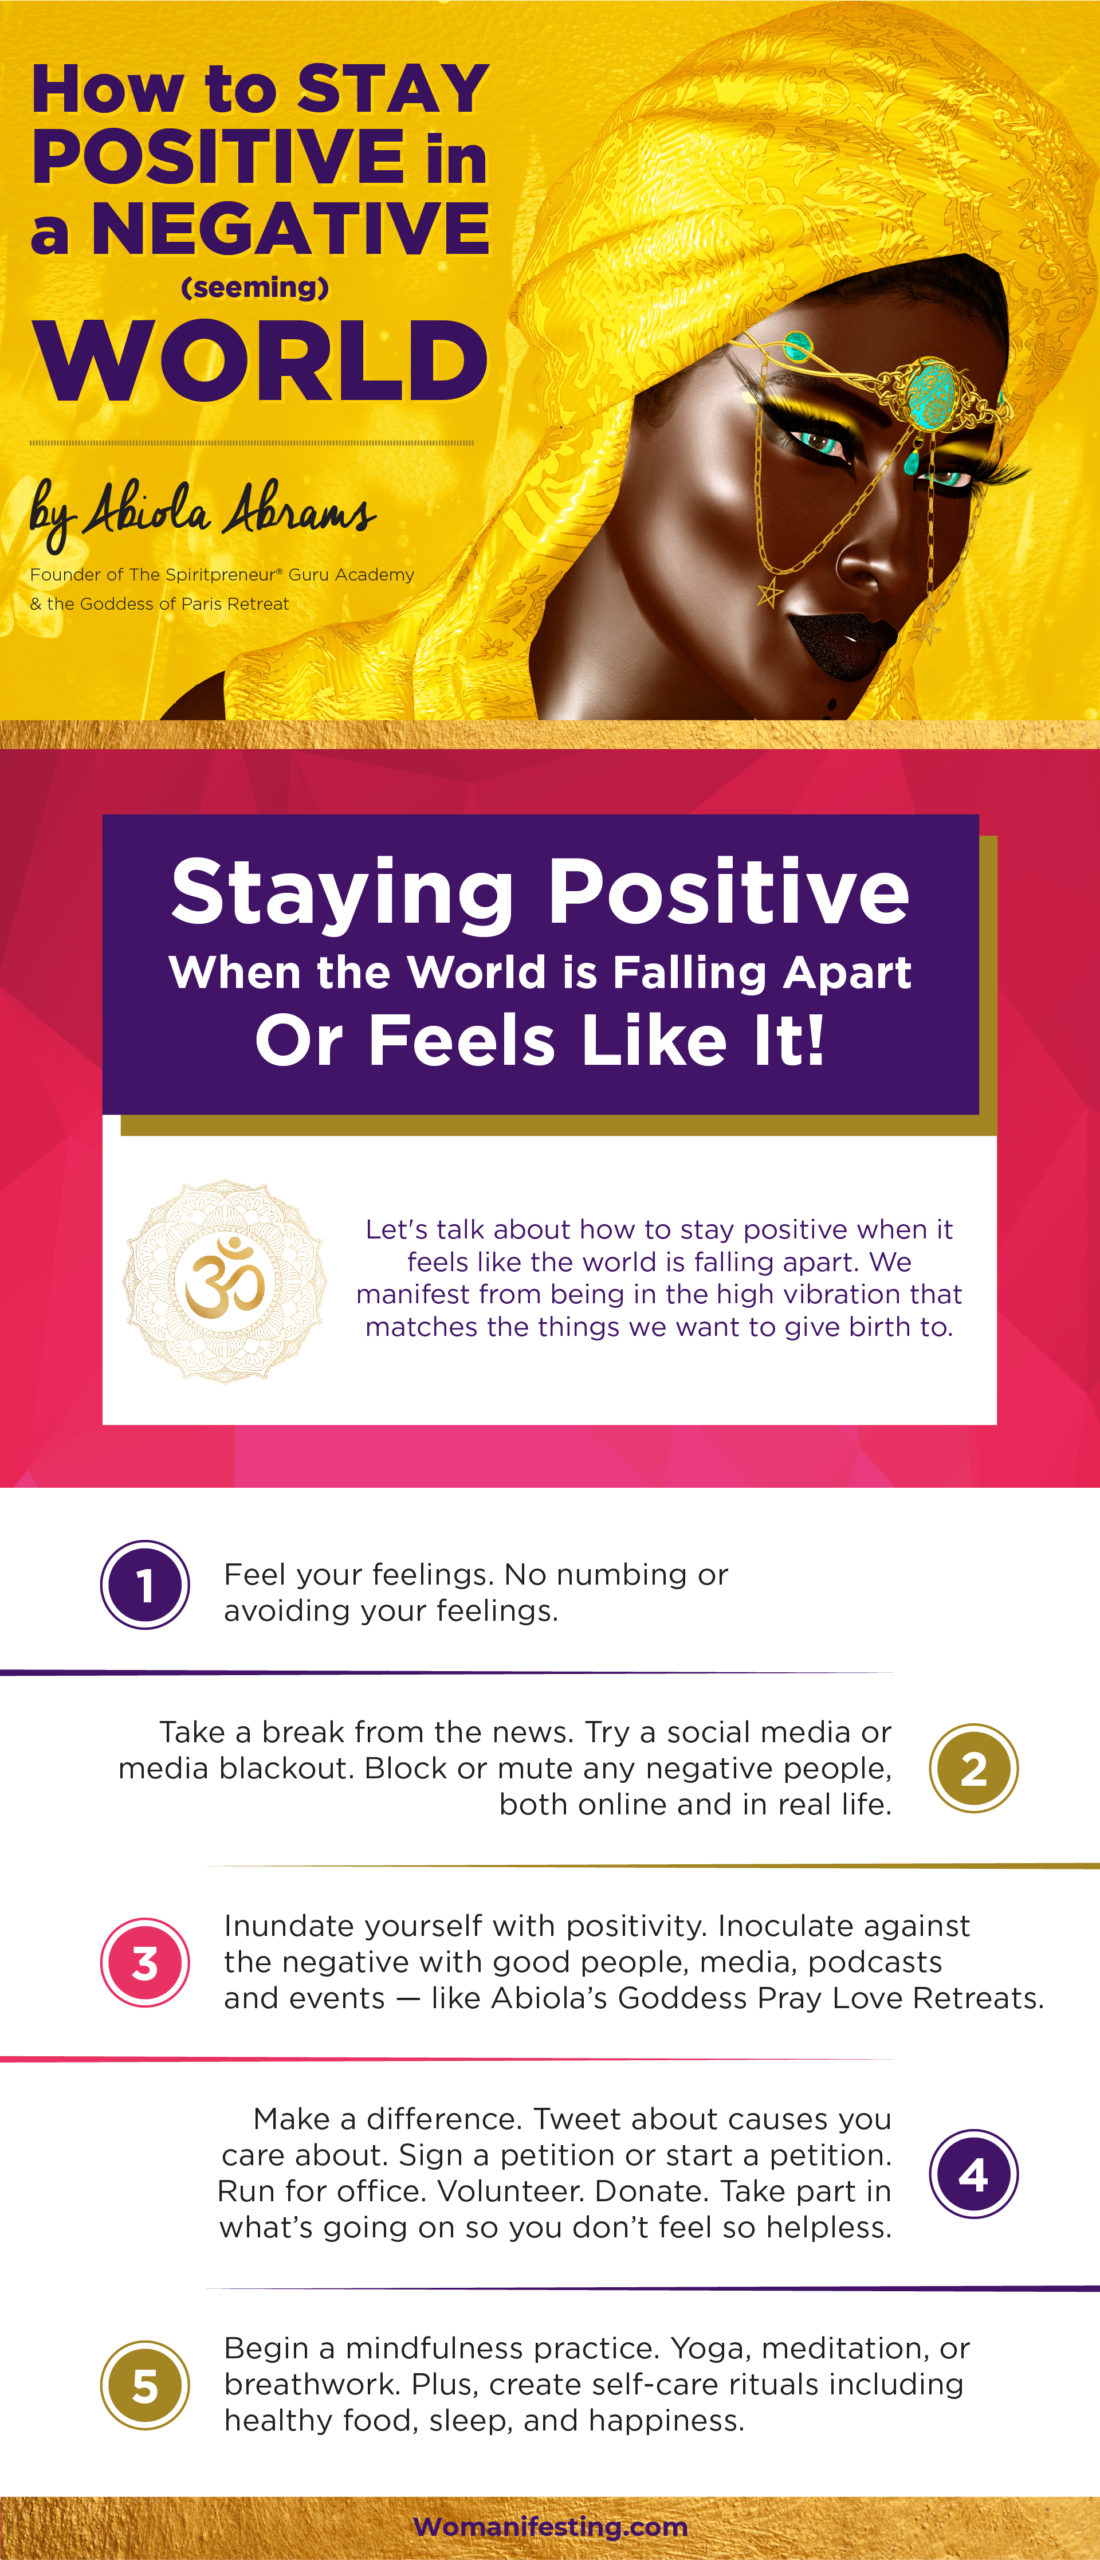 How to Stay Positive in a Seemingly Negative World [Video]